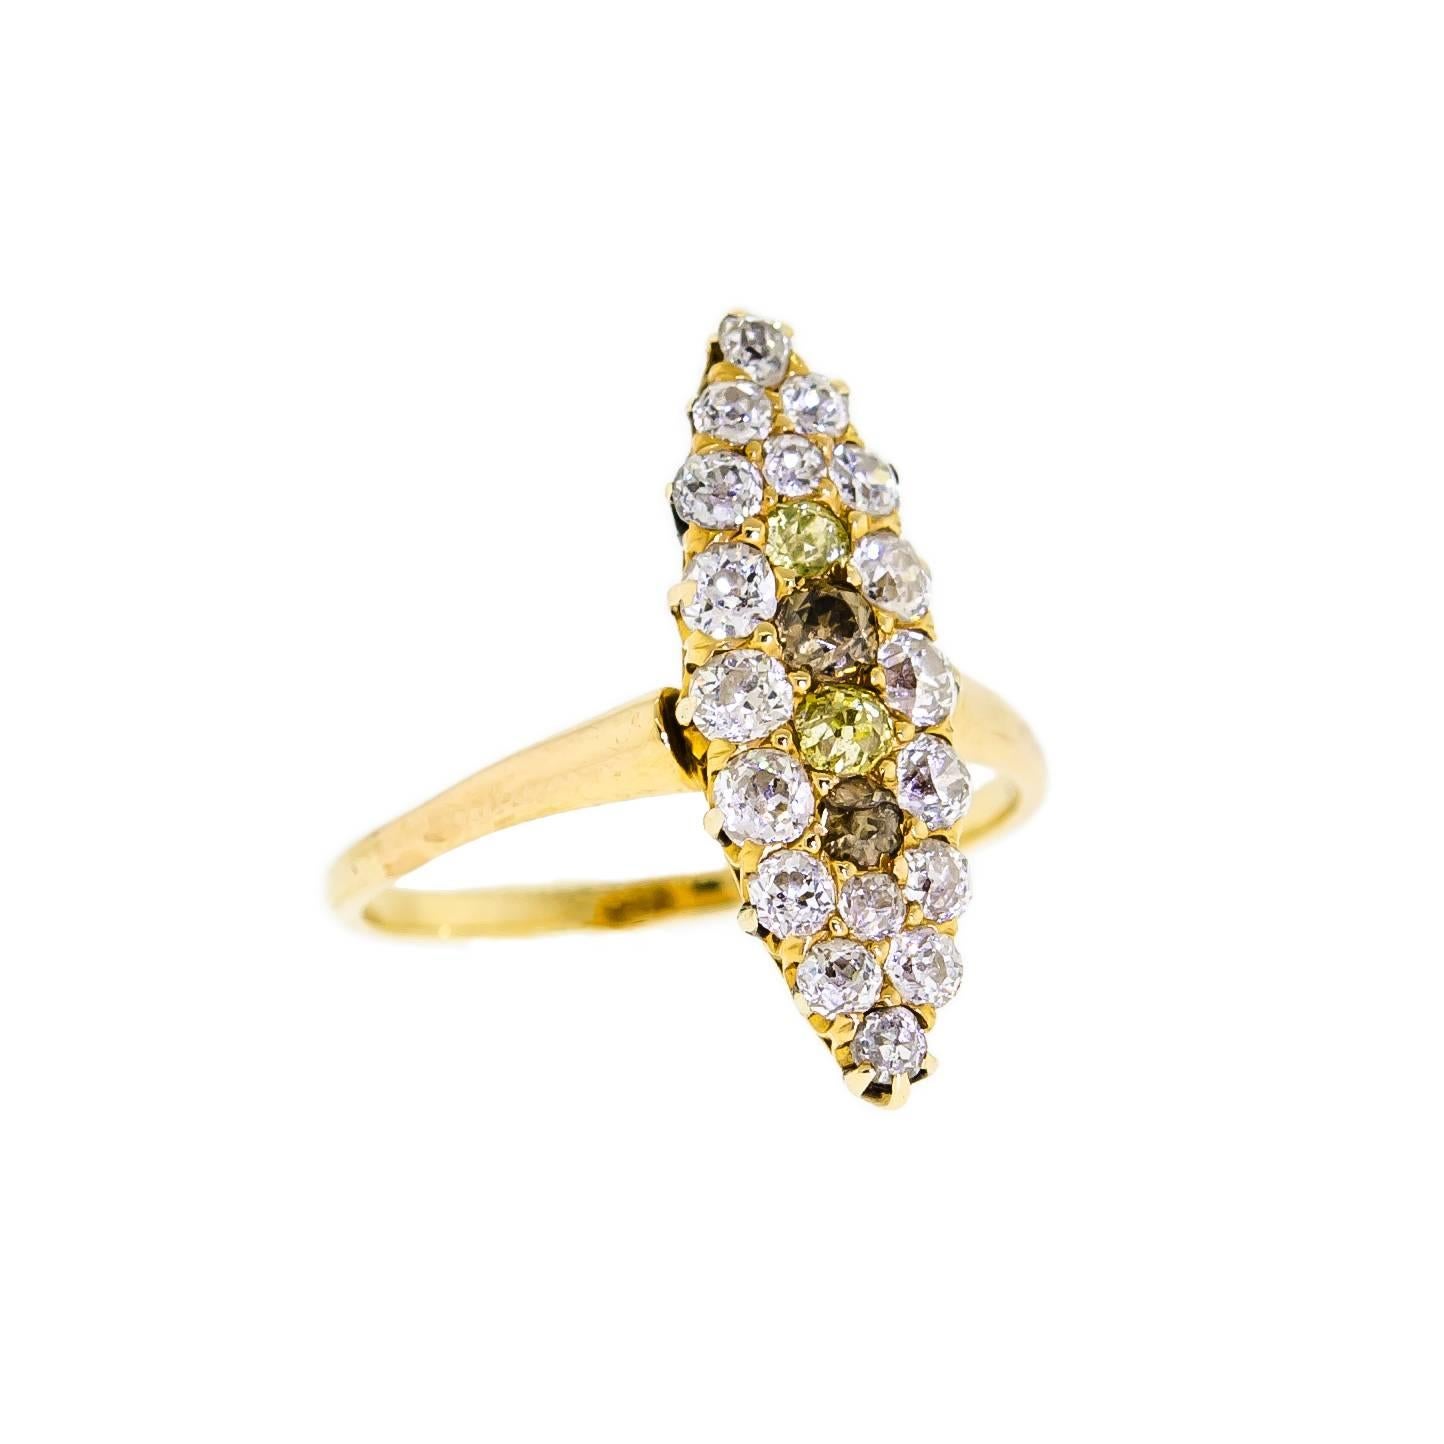 This sweet antique turn-of-the-Century yellow gold and diamond ring, within a navette shaped setting, is set with two stunning Old Mine Cut yellow diamonds weighing approximately 0.12cts total and 18 dazzling Old European Cut and Old Mine Cut